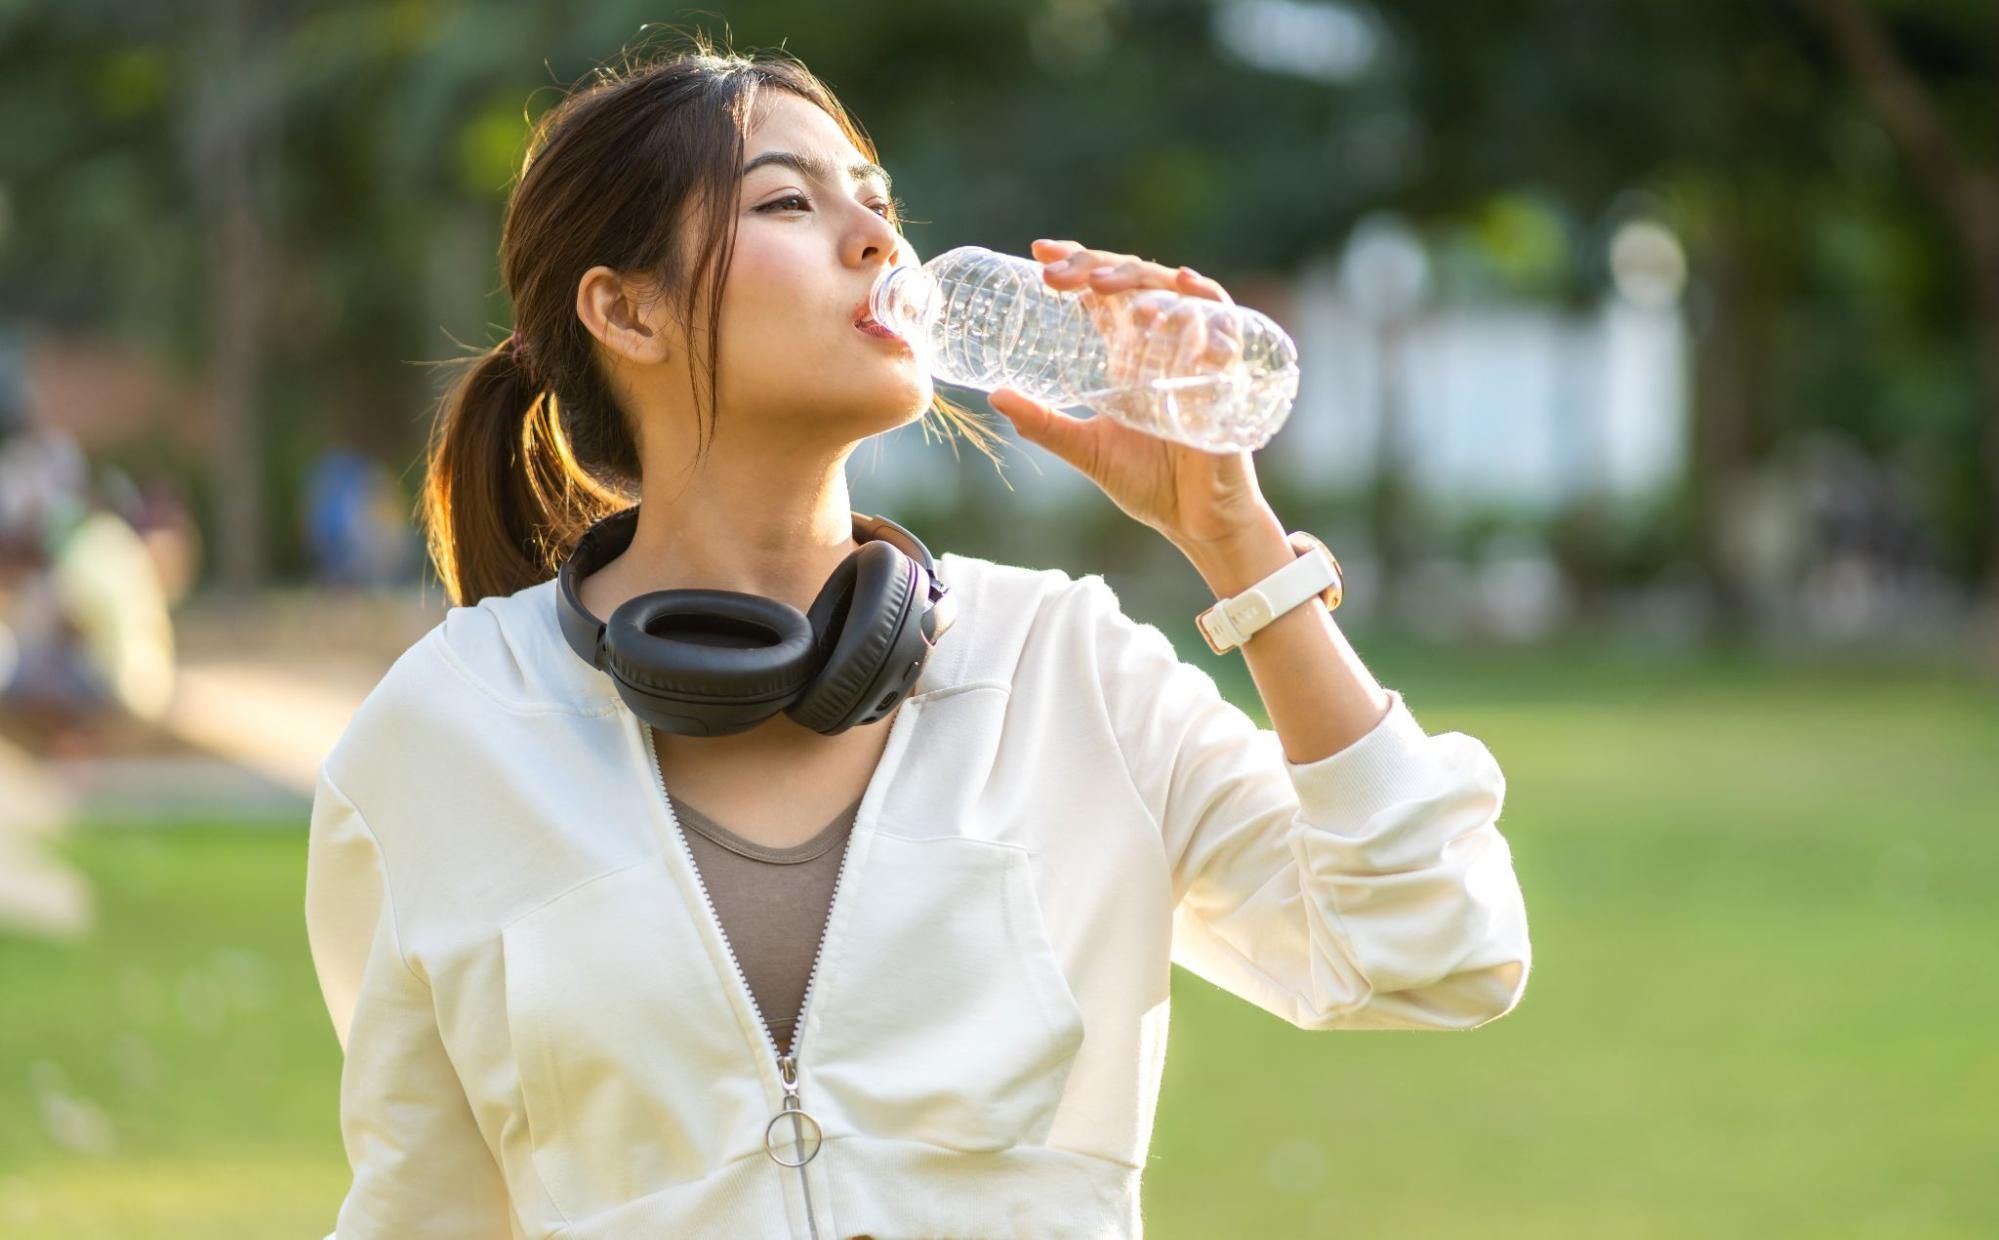 Woman drinking water in a park while wearing headphones around her neck, symbolizing healthy lifestyle choices.